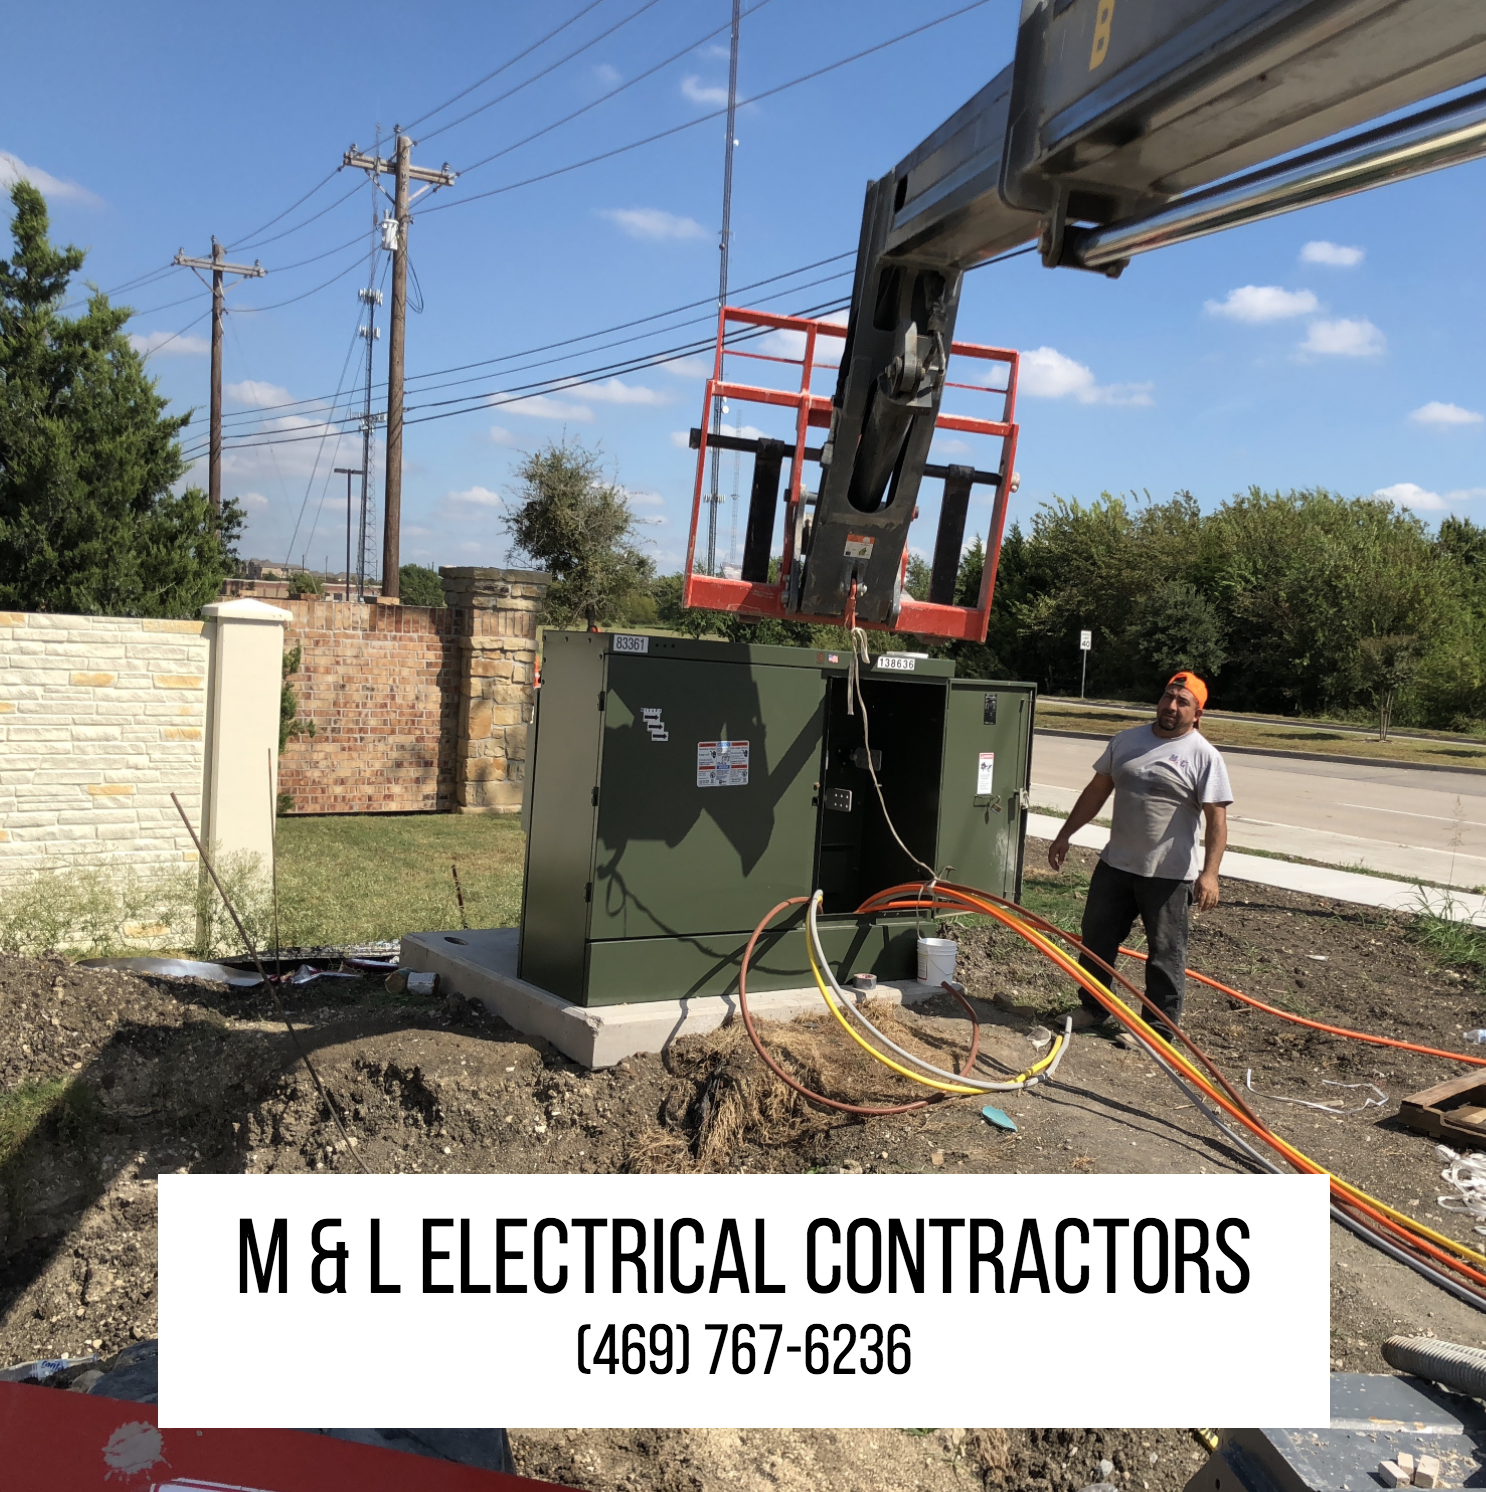 Electrical Wiring, Commercail Electric, Residentail Remodeling, New Construction Wiring,Electrical Contractor